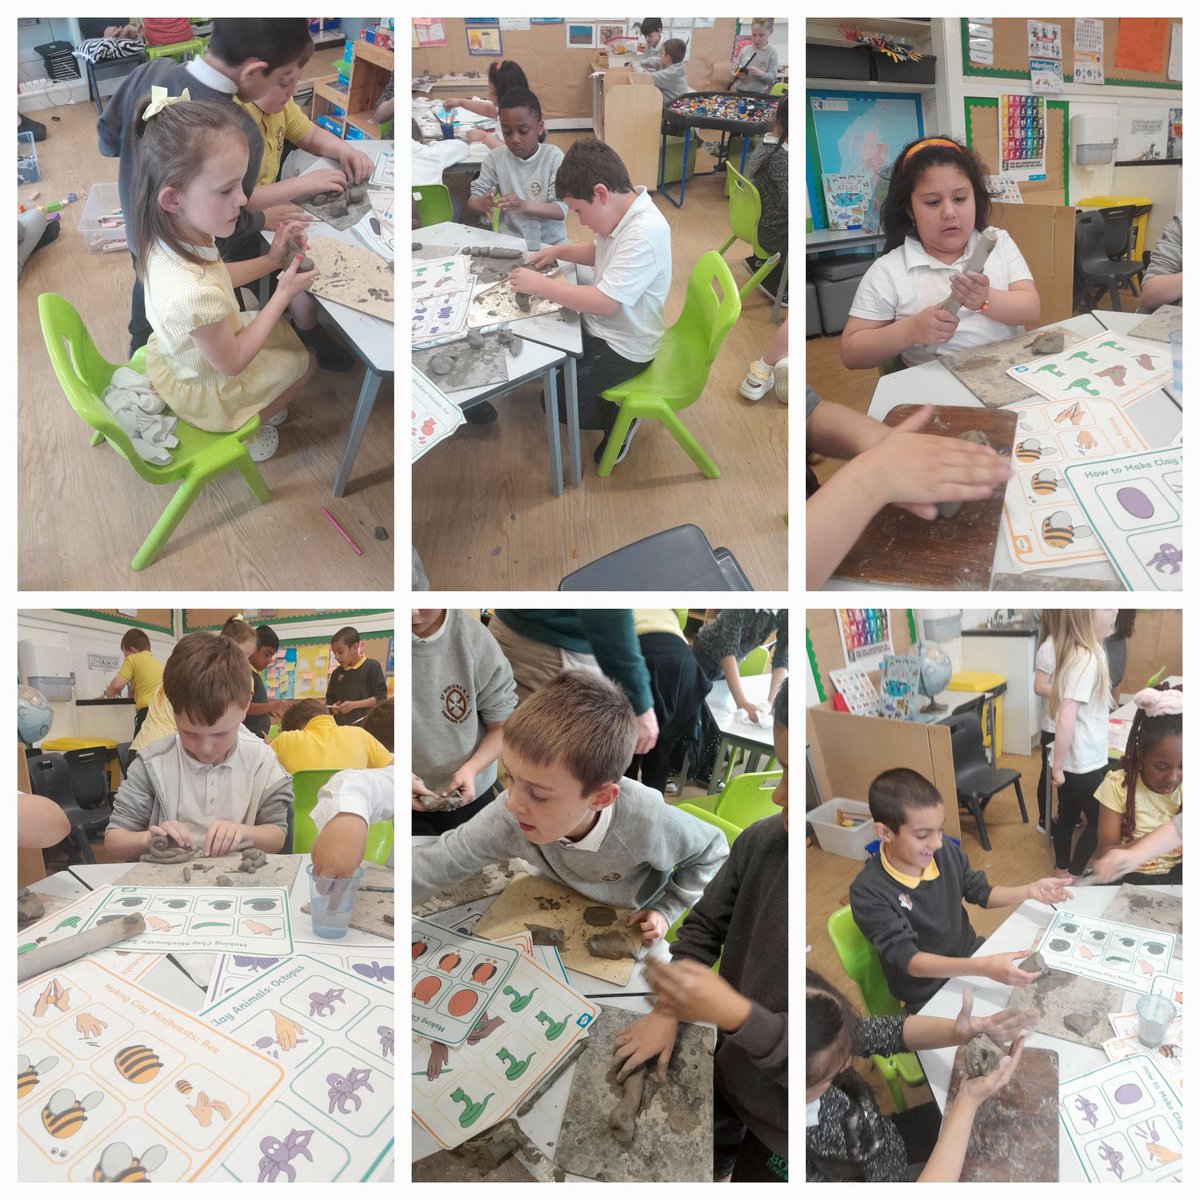 In Primary 3 today, boys and girls got hands-on with clay, crafting animals for their farm topic! It was great to see their creativity flourish through play-based learning. #HandsOnLearning #article29 #article31 #globalgoal4